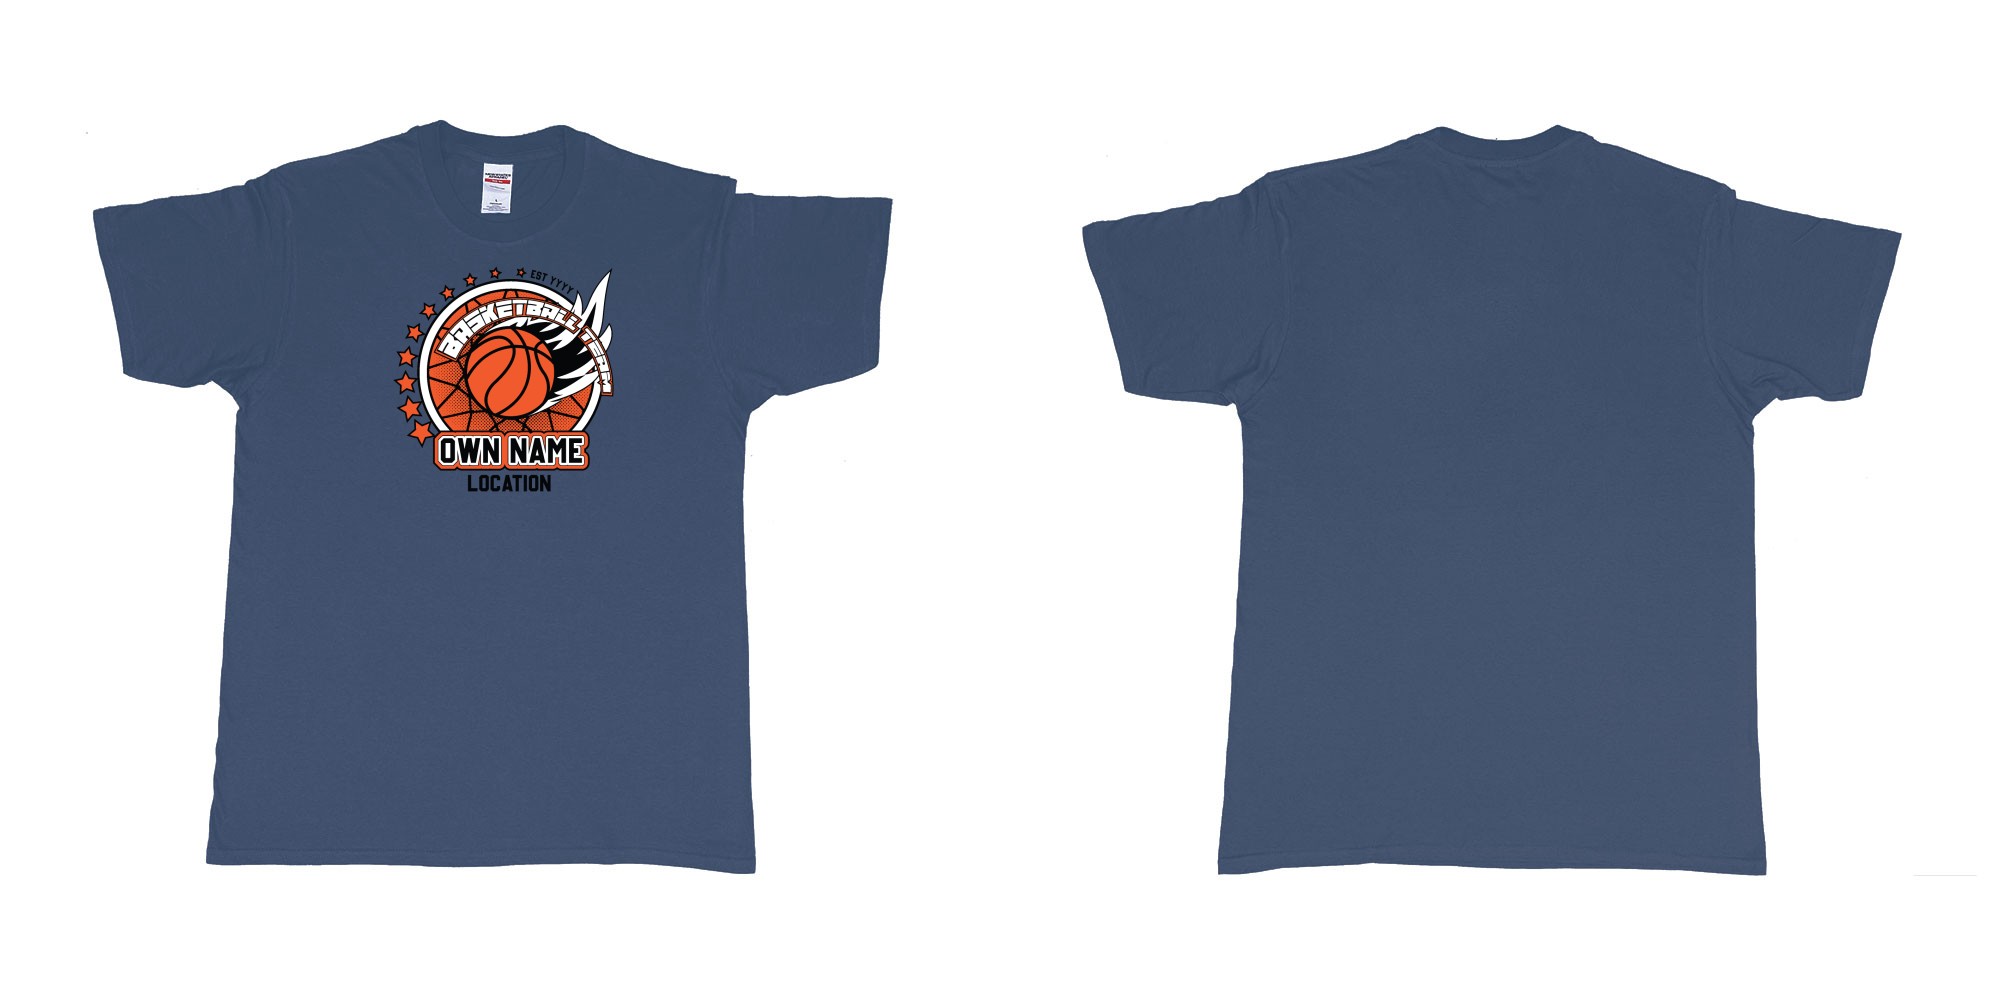 Custom tshirt design basketball team own name location established year custom design production bali in fabric color navy choice your own text made in Bali by The Pirate Way